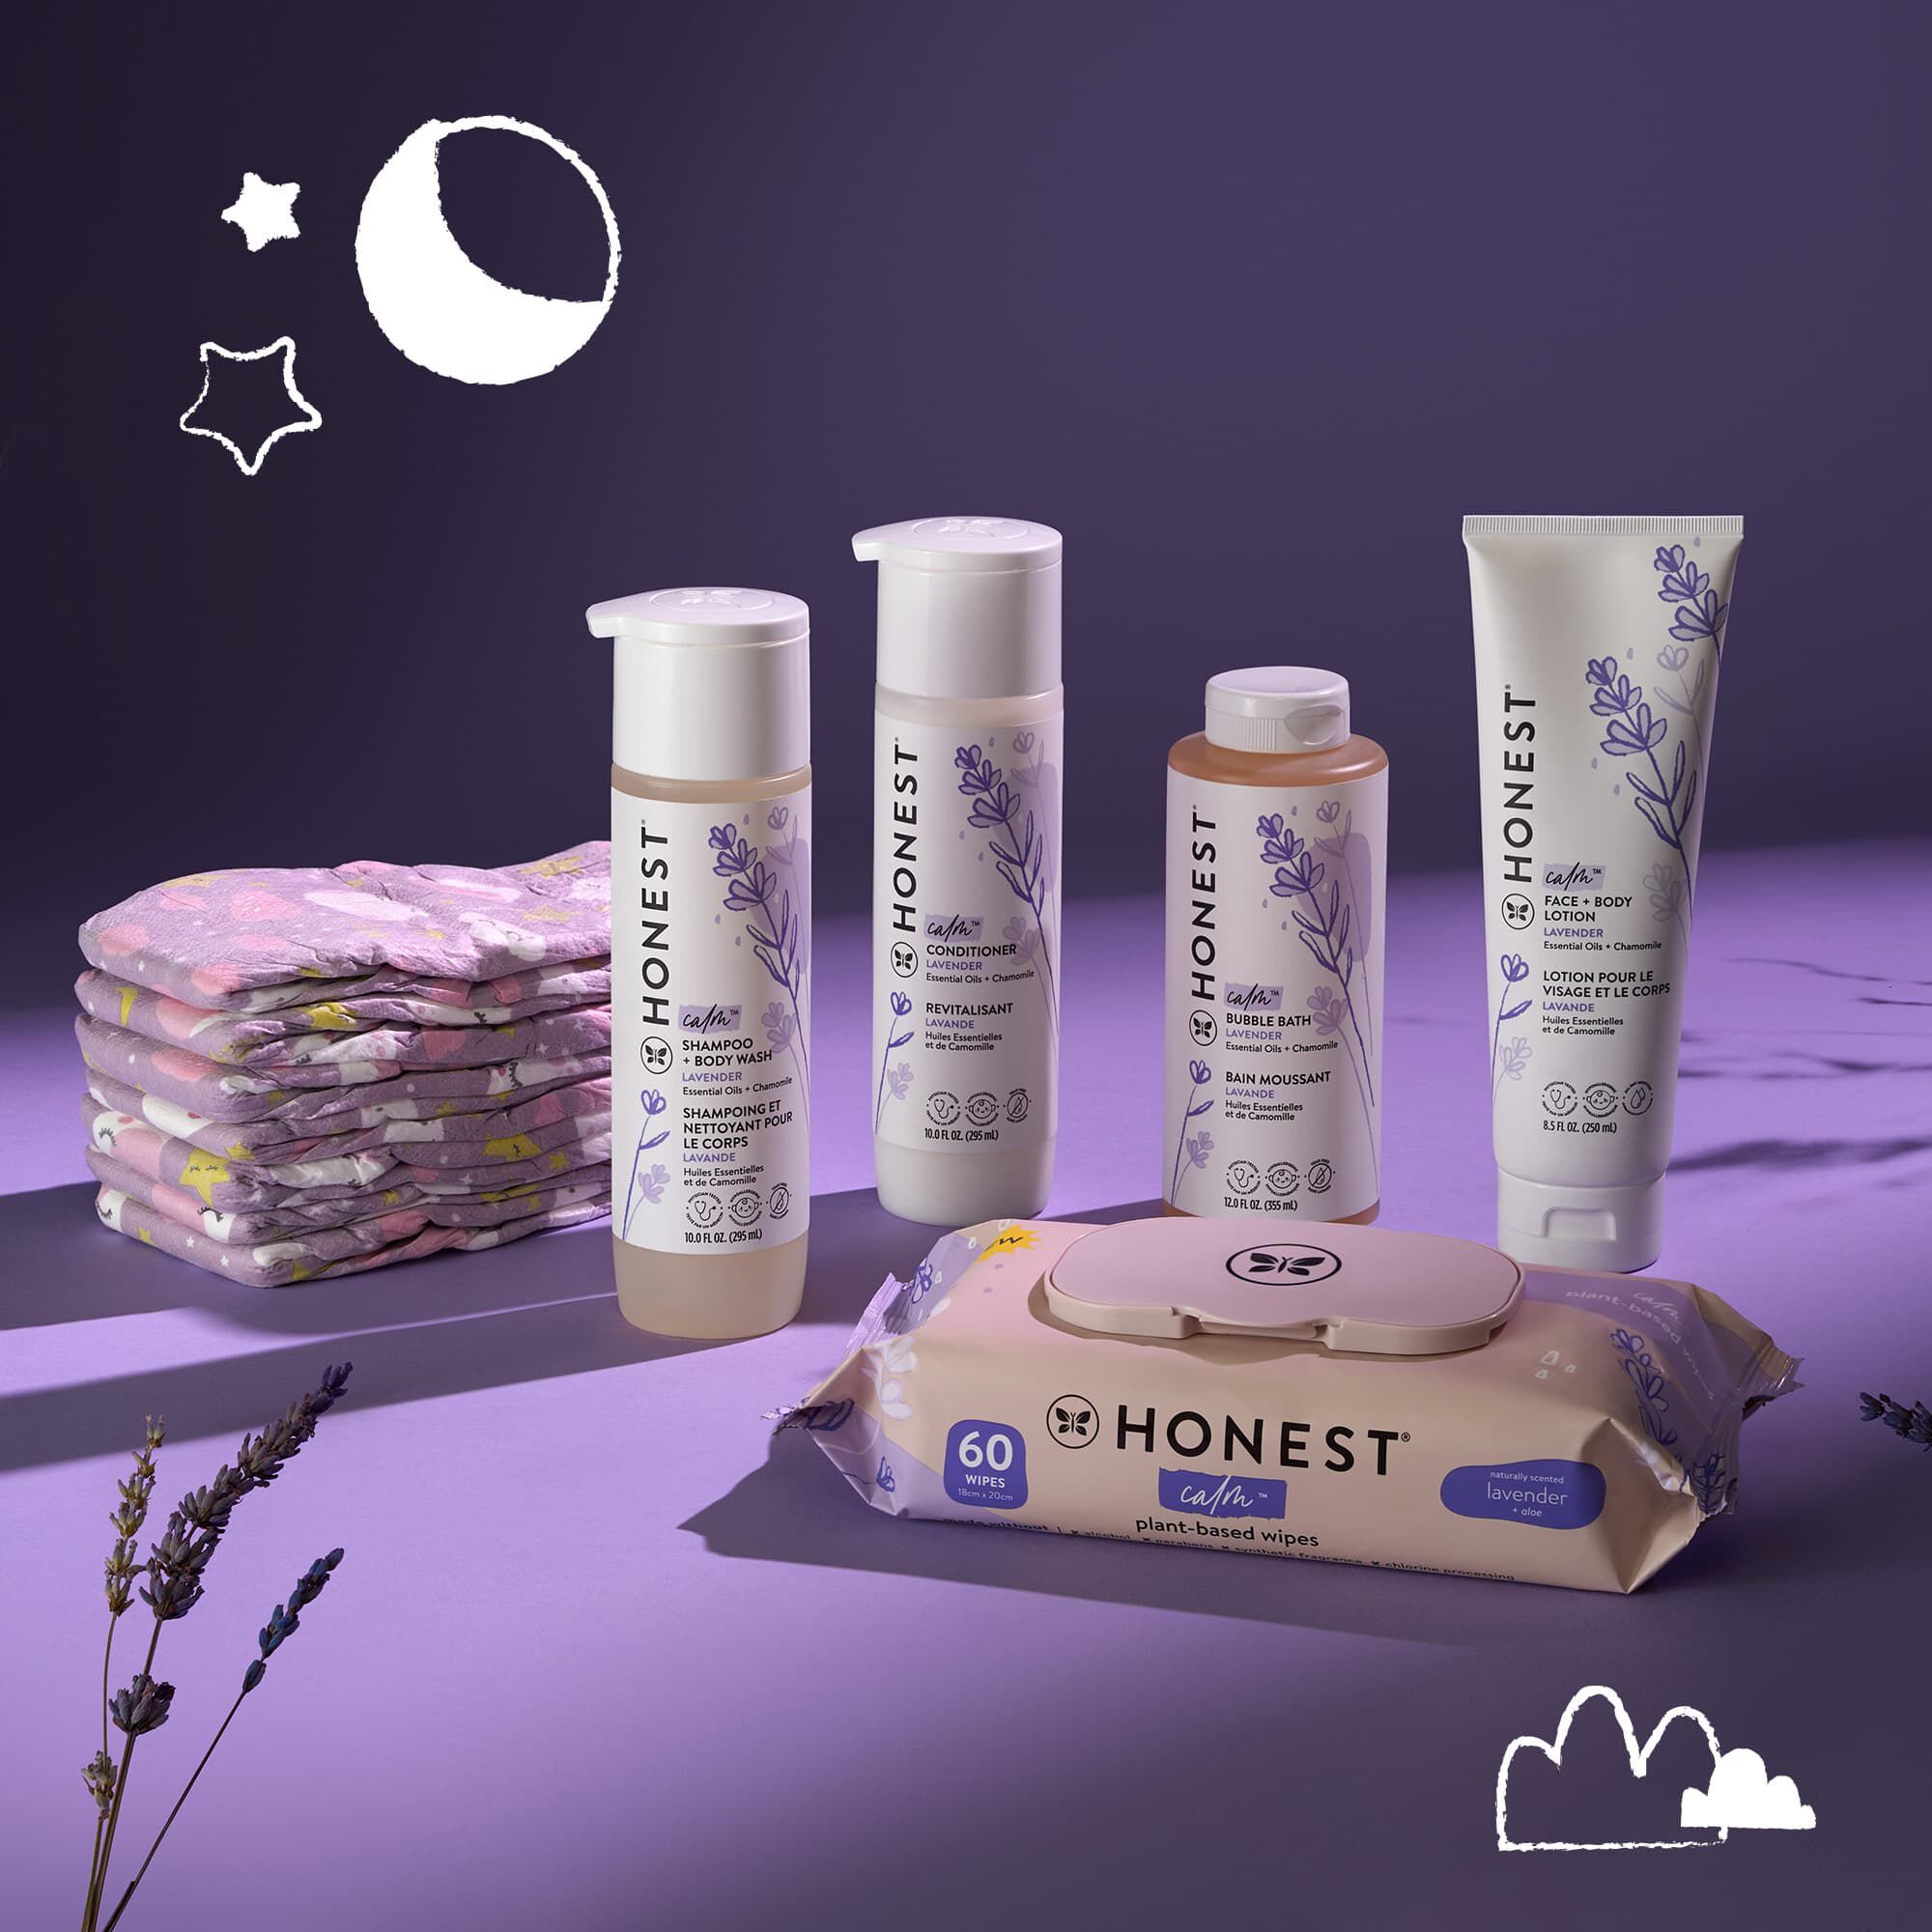 Calm Personal Care Collection, overnight diapers, and lavender wipes